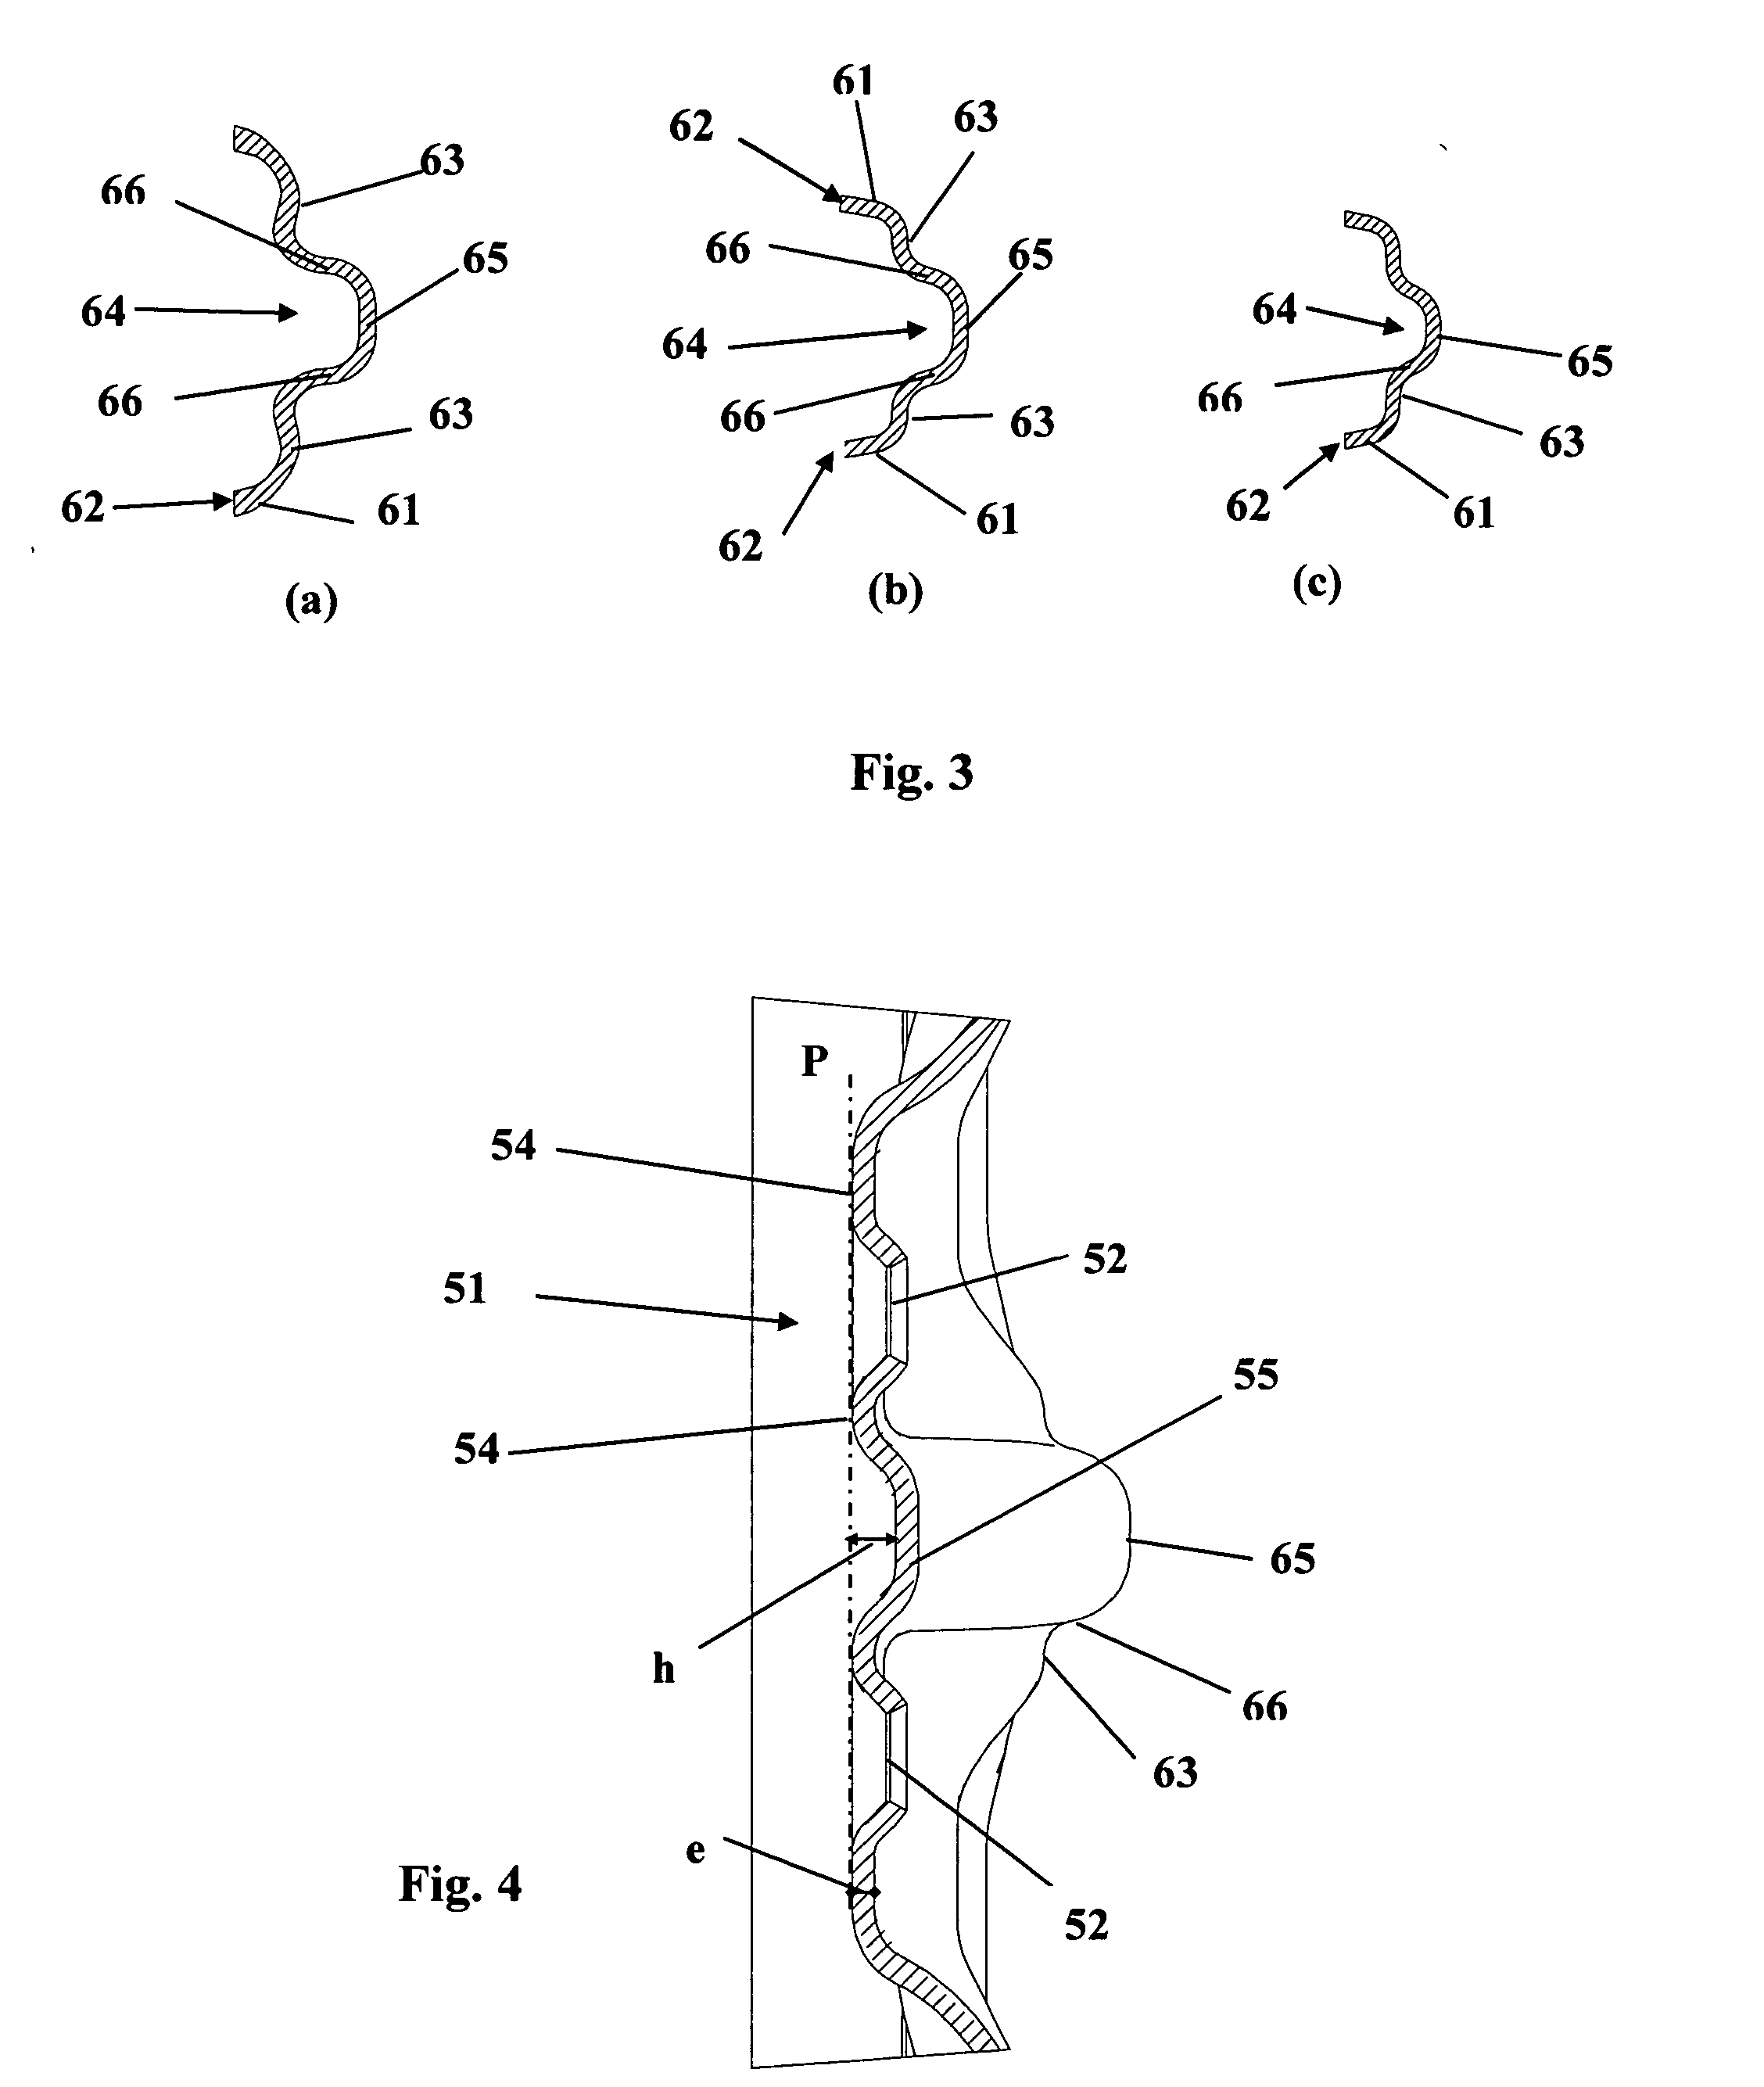 Motor vehicle wheel disc, in particular for a passenger vehicle